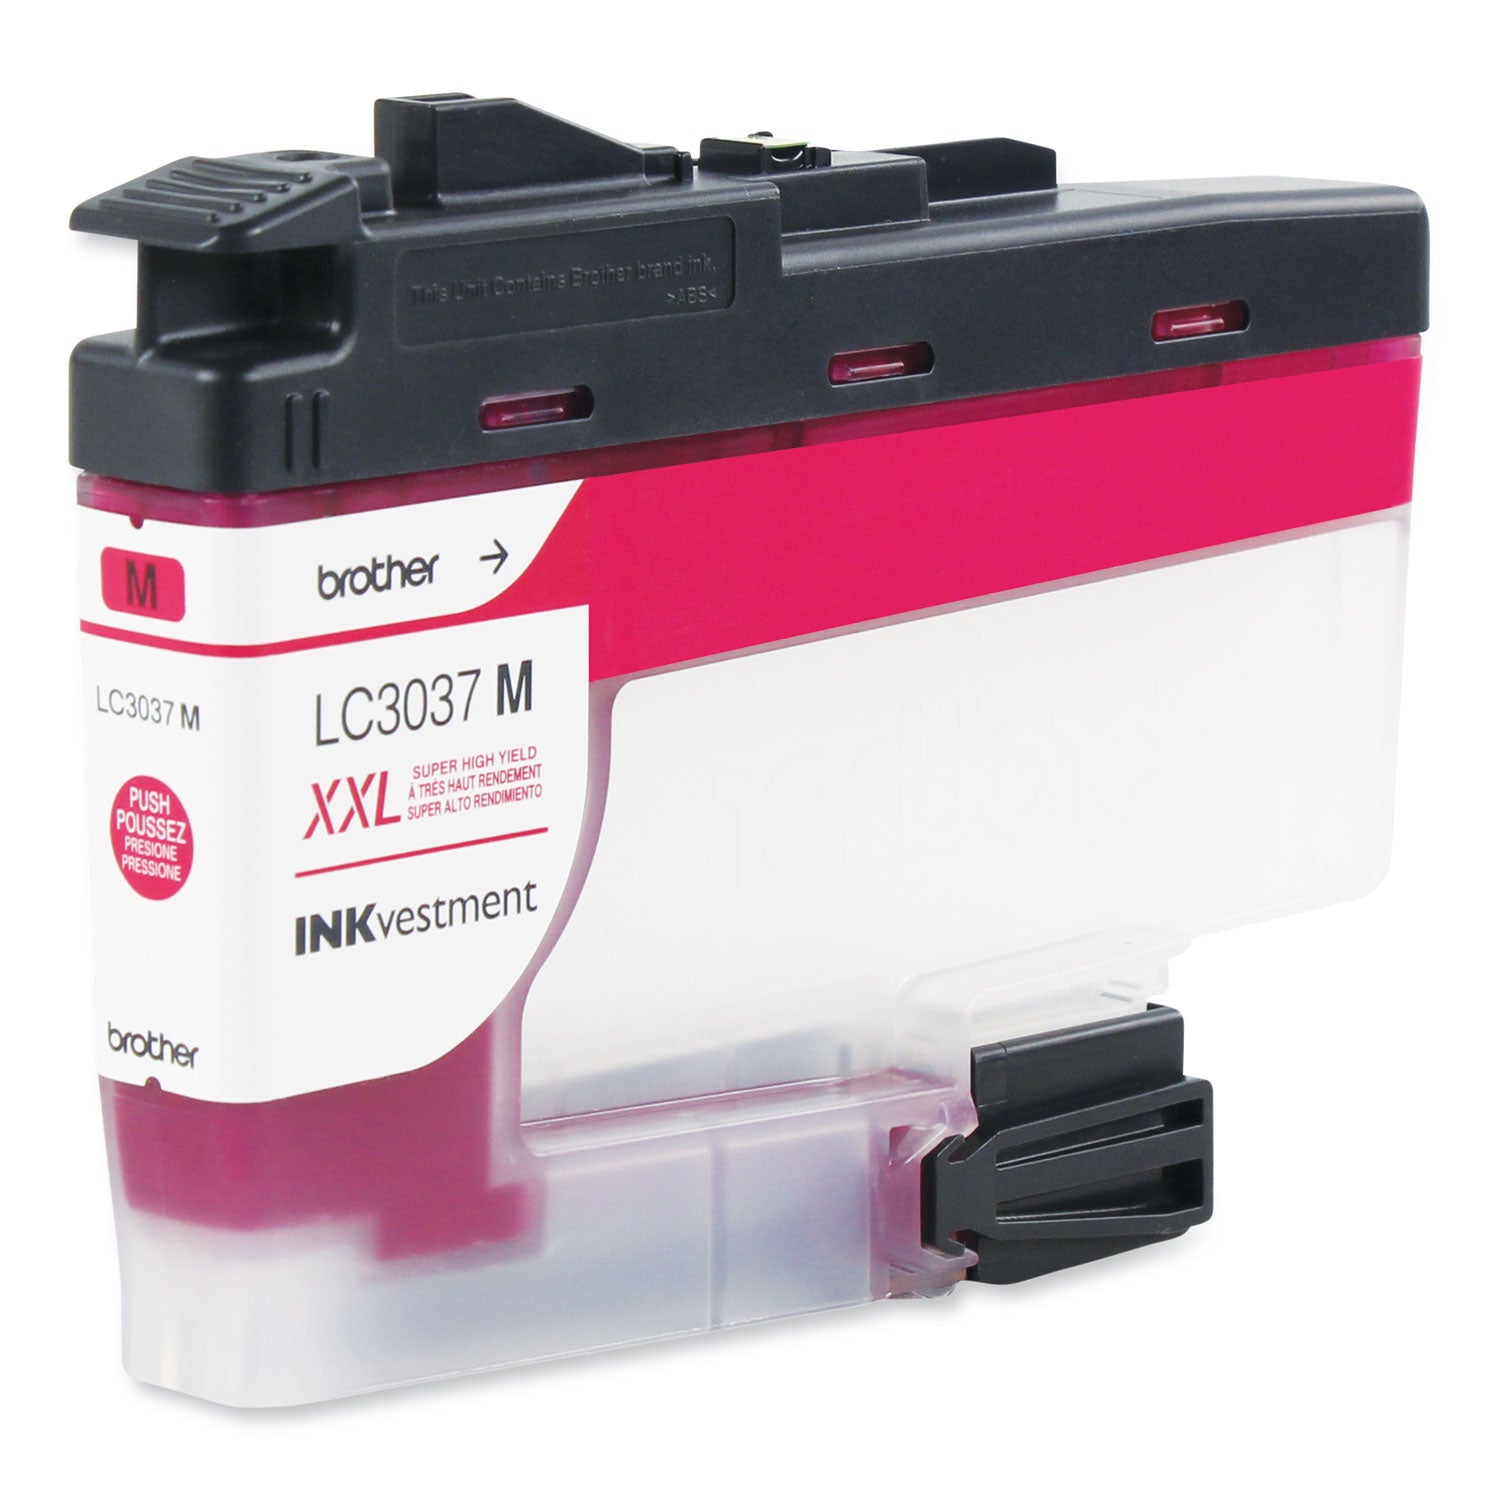 lc3037m-inkvestment-super-high-yield-ink-1500-page-yield-magenta_brtlc3037m - 2